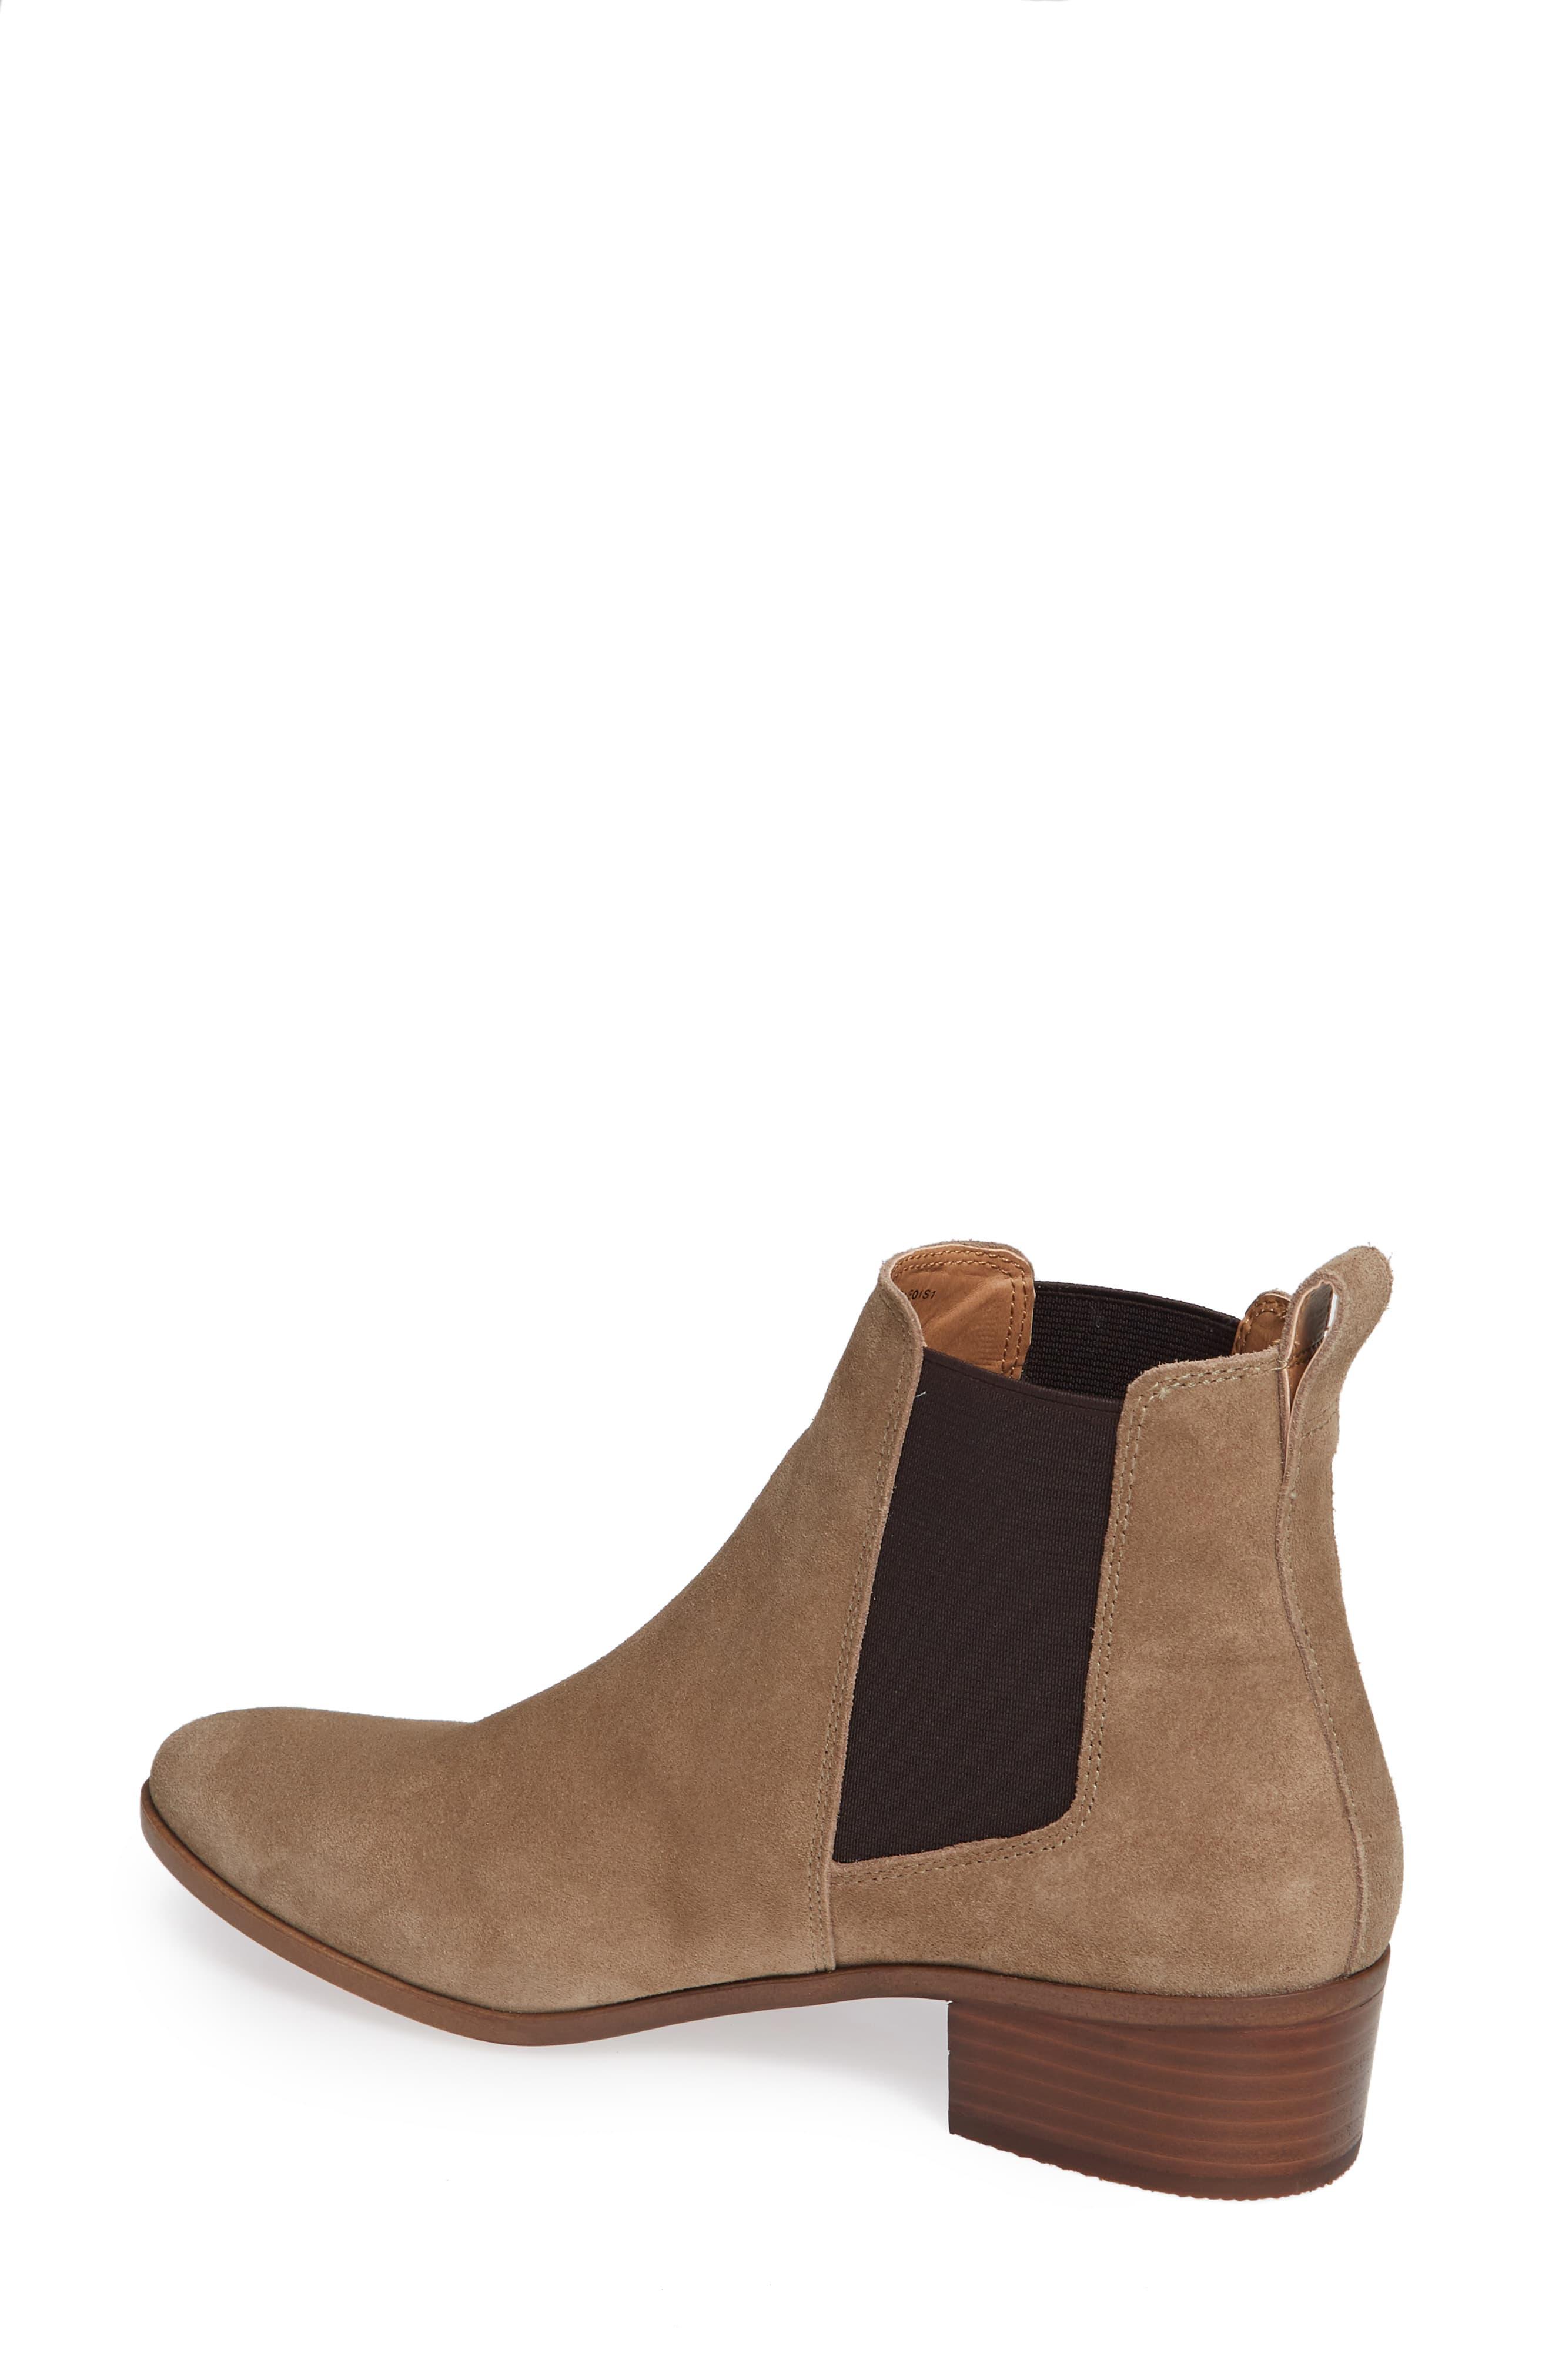 steve madden taupe suede booties